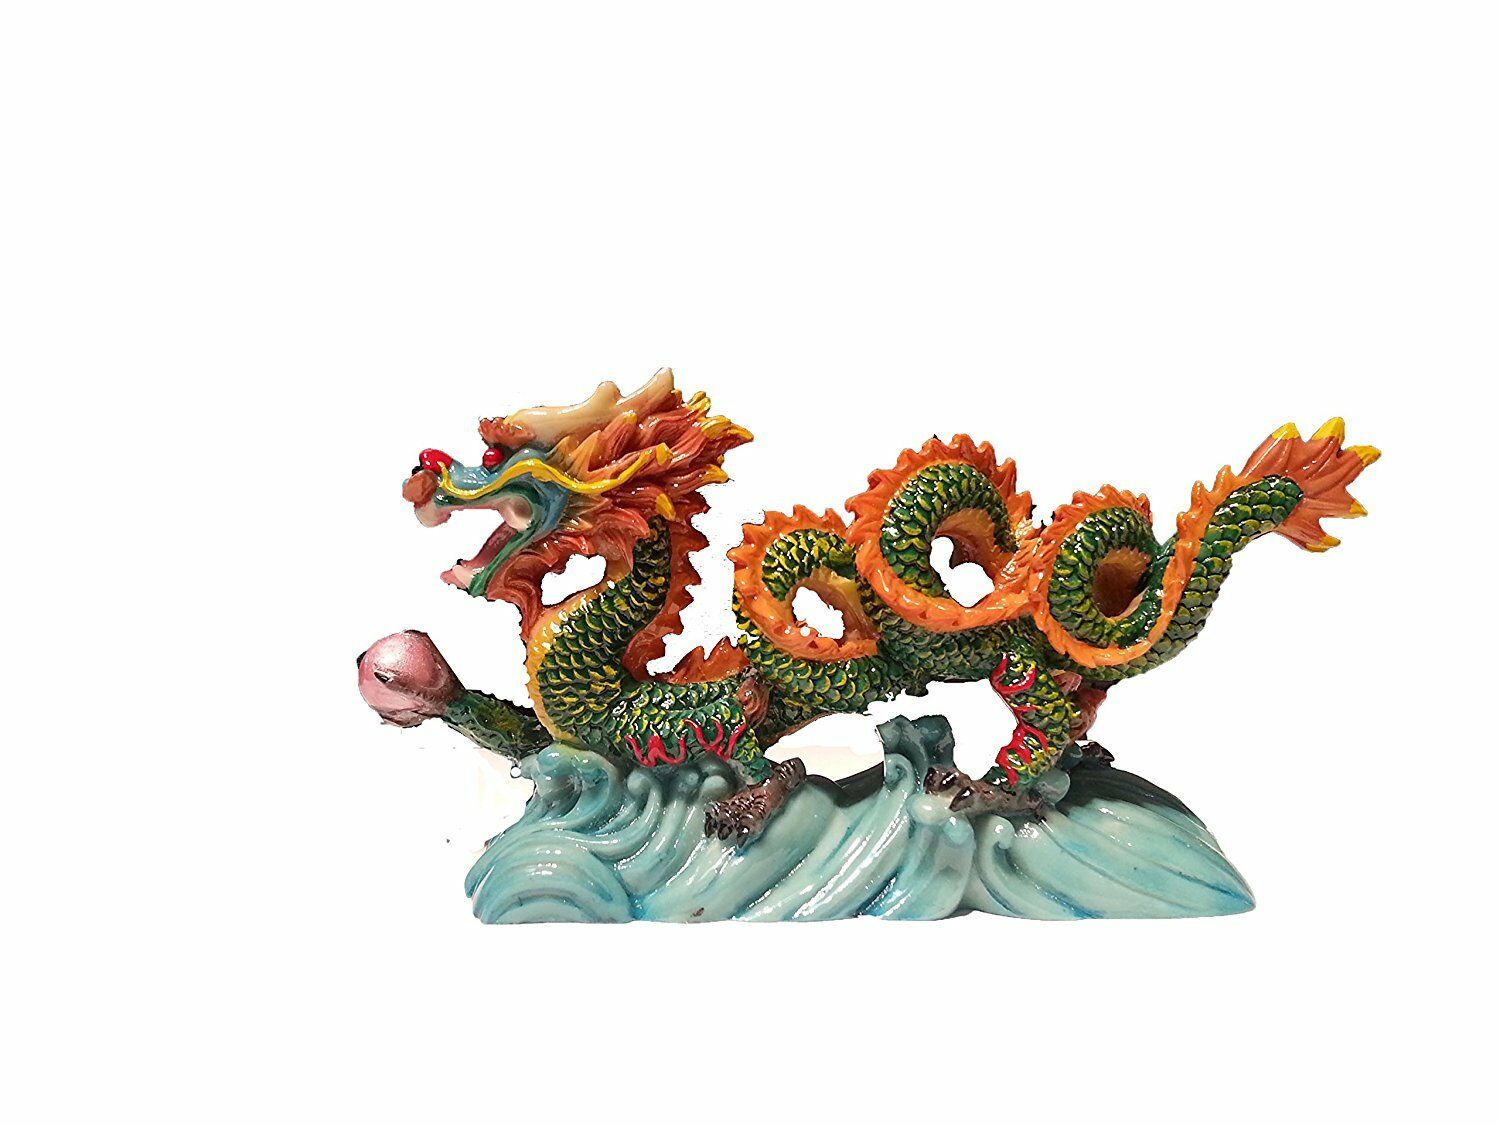 New Color Chinese Feng Shui Dragon Figurine Statue For Luck & Success 6" Long